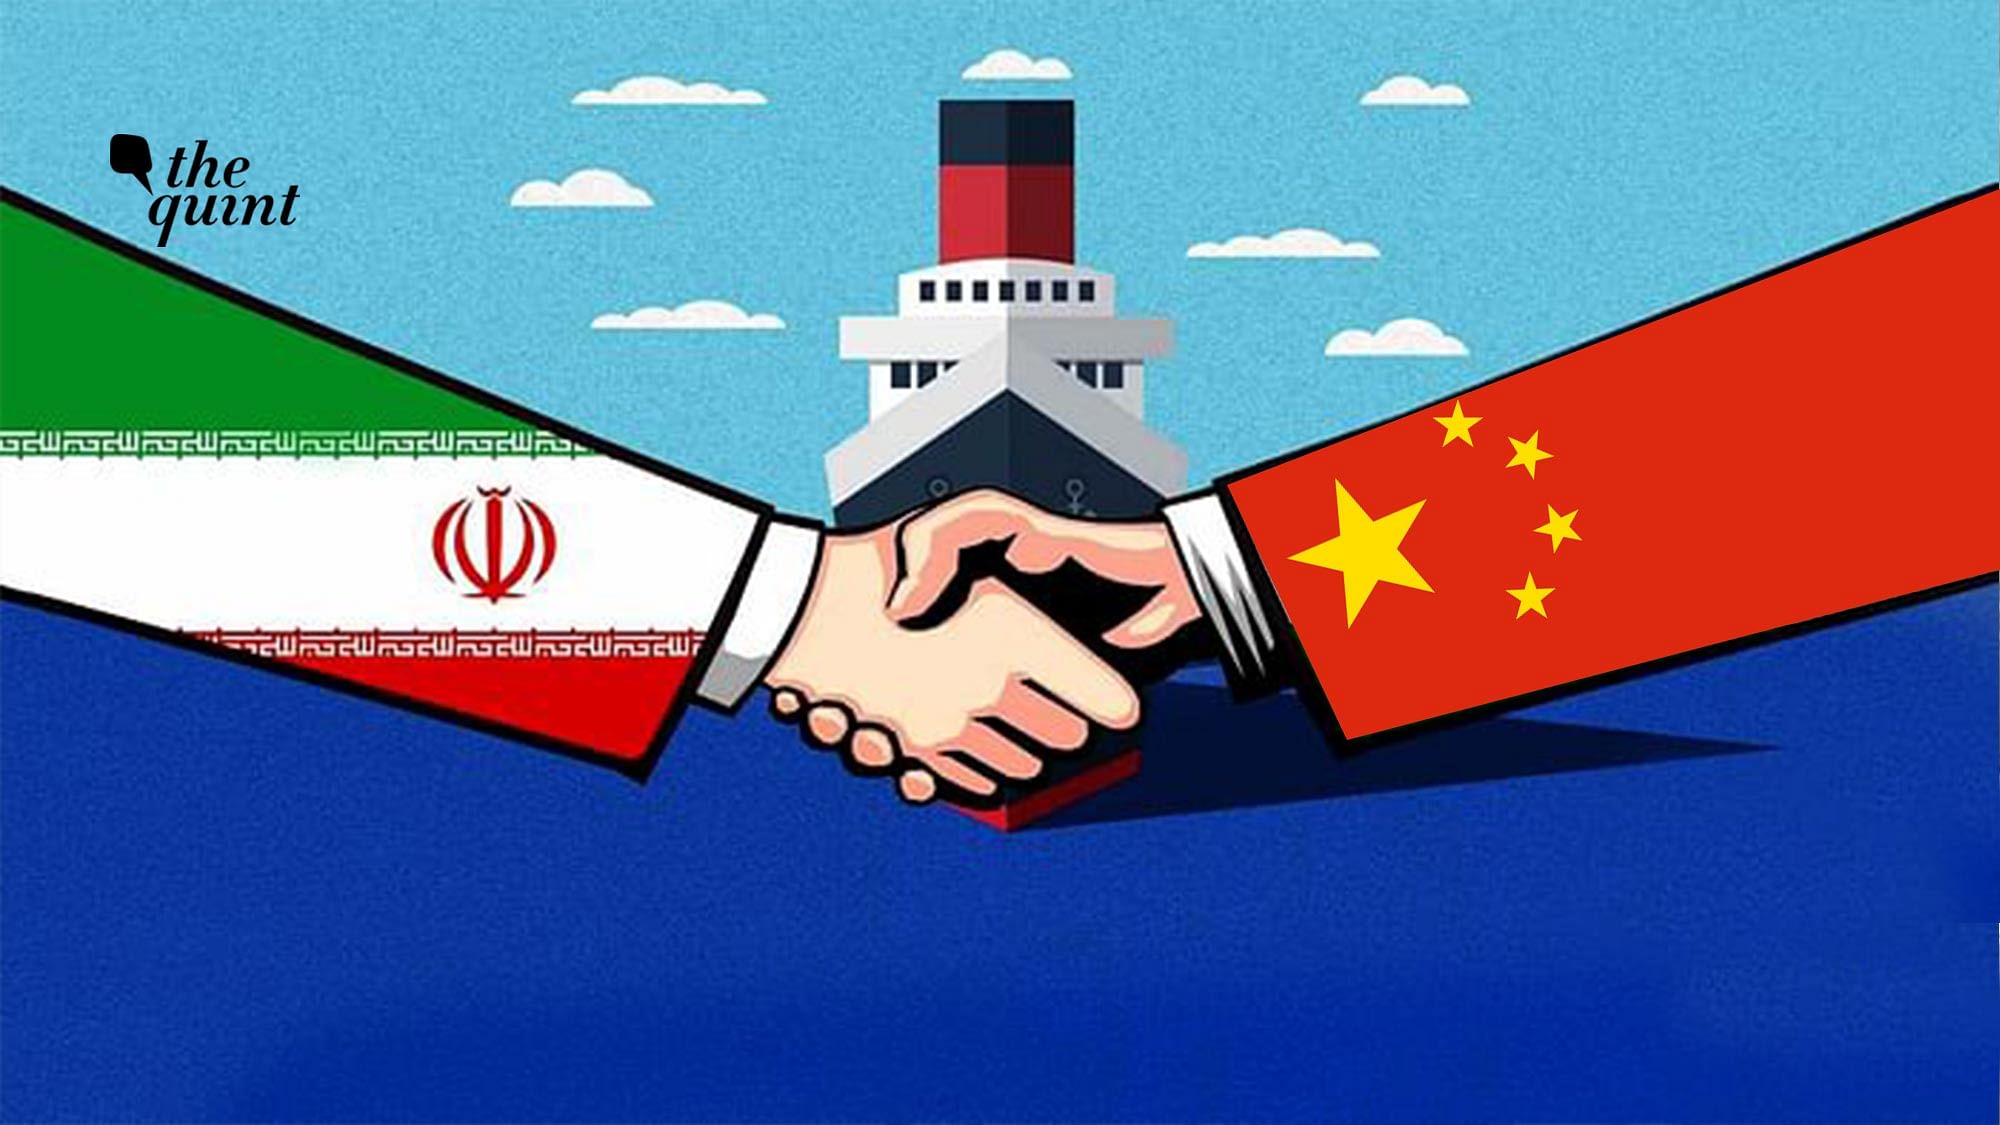 Image of Iran &amp; China flags used for representation.